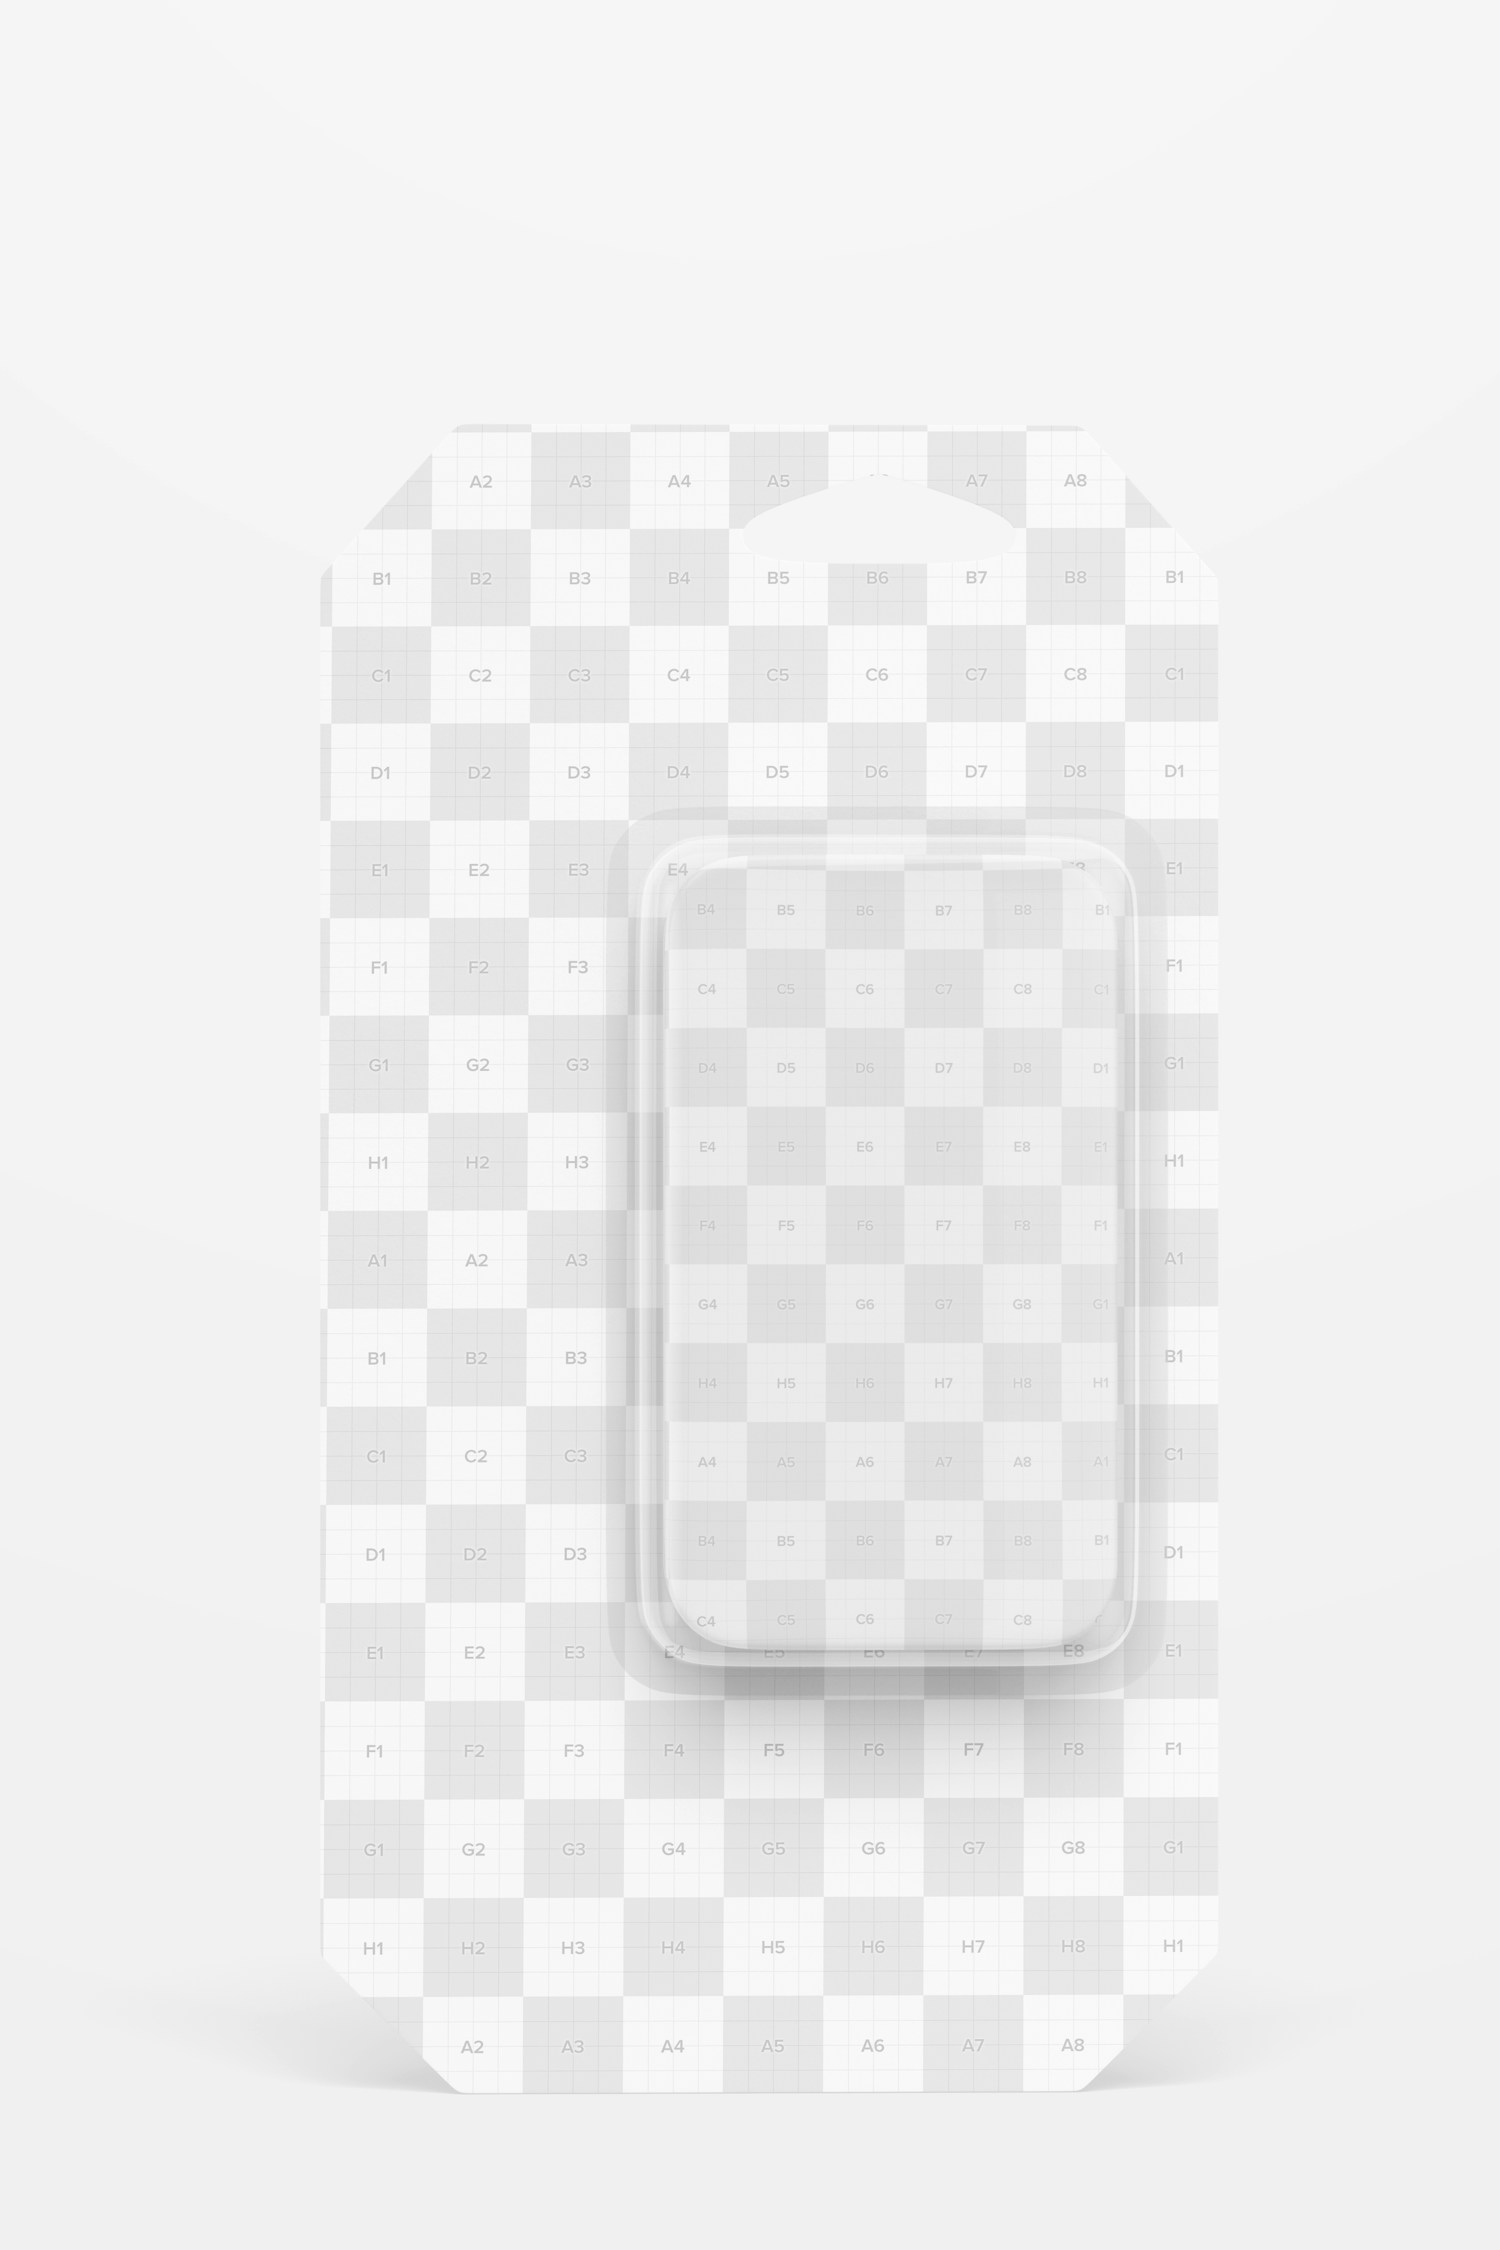 Power Bank Blister Mockup, Front View